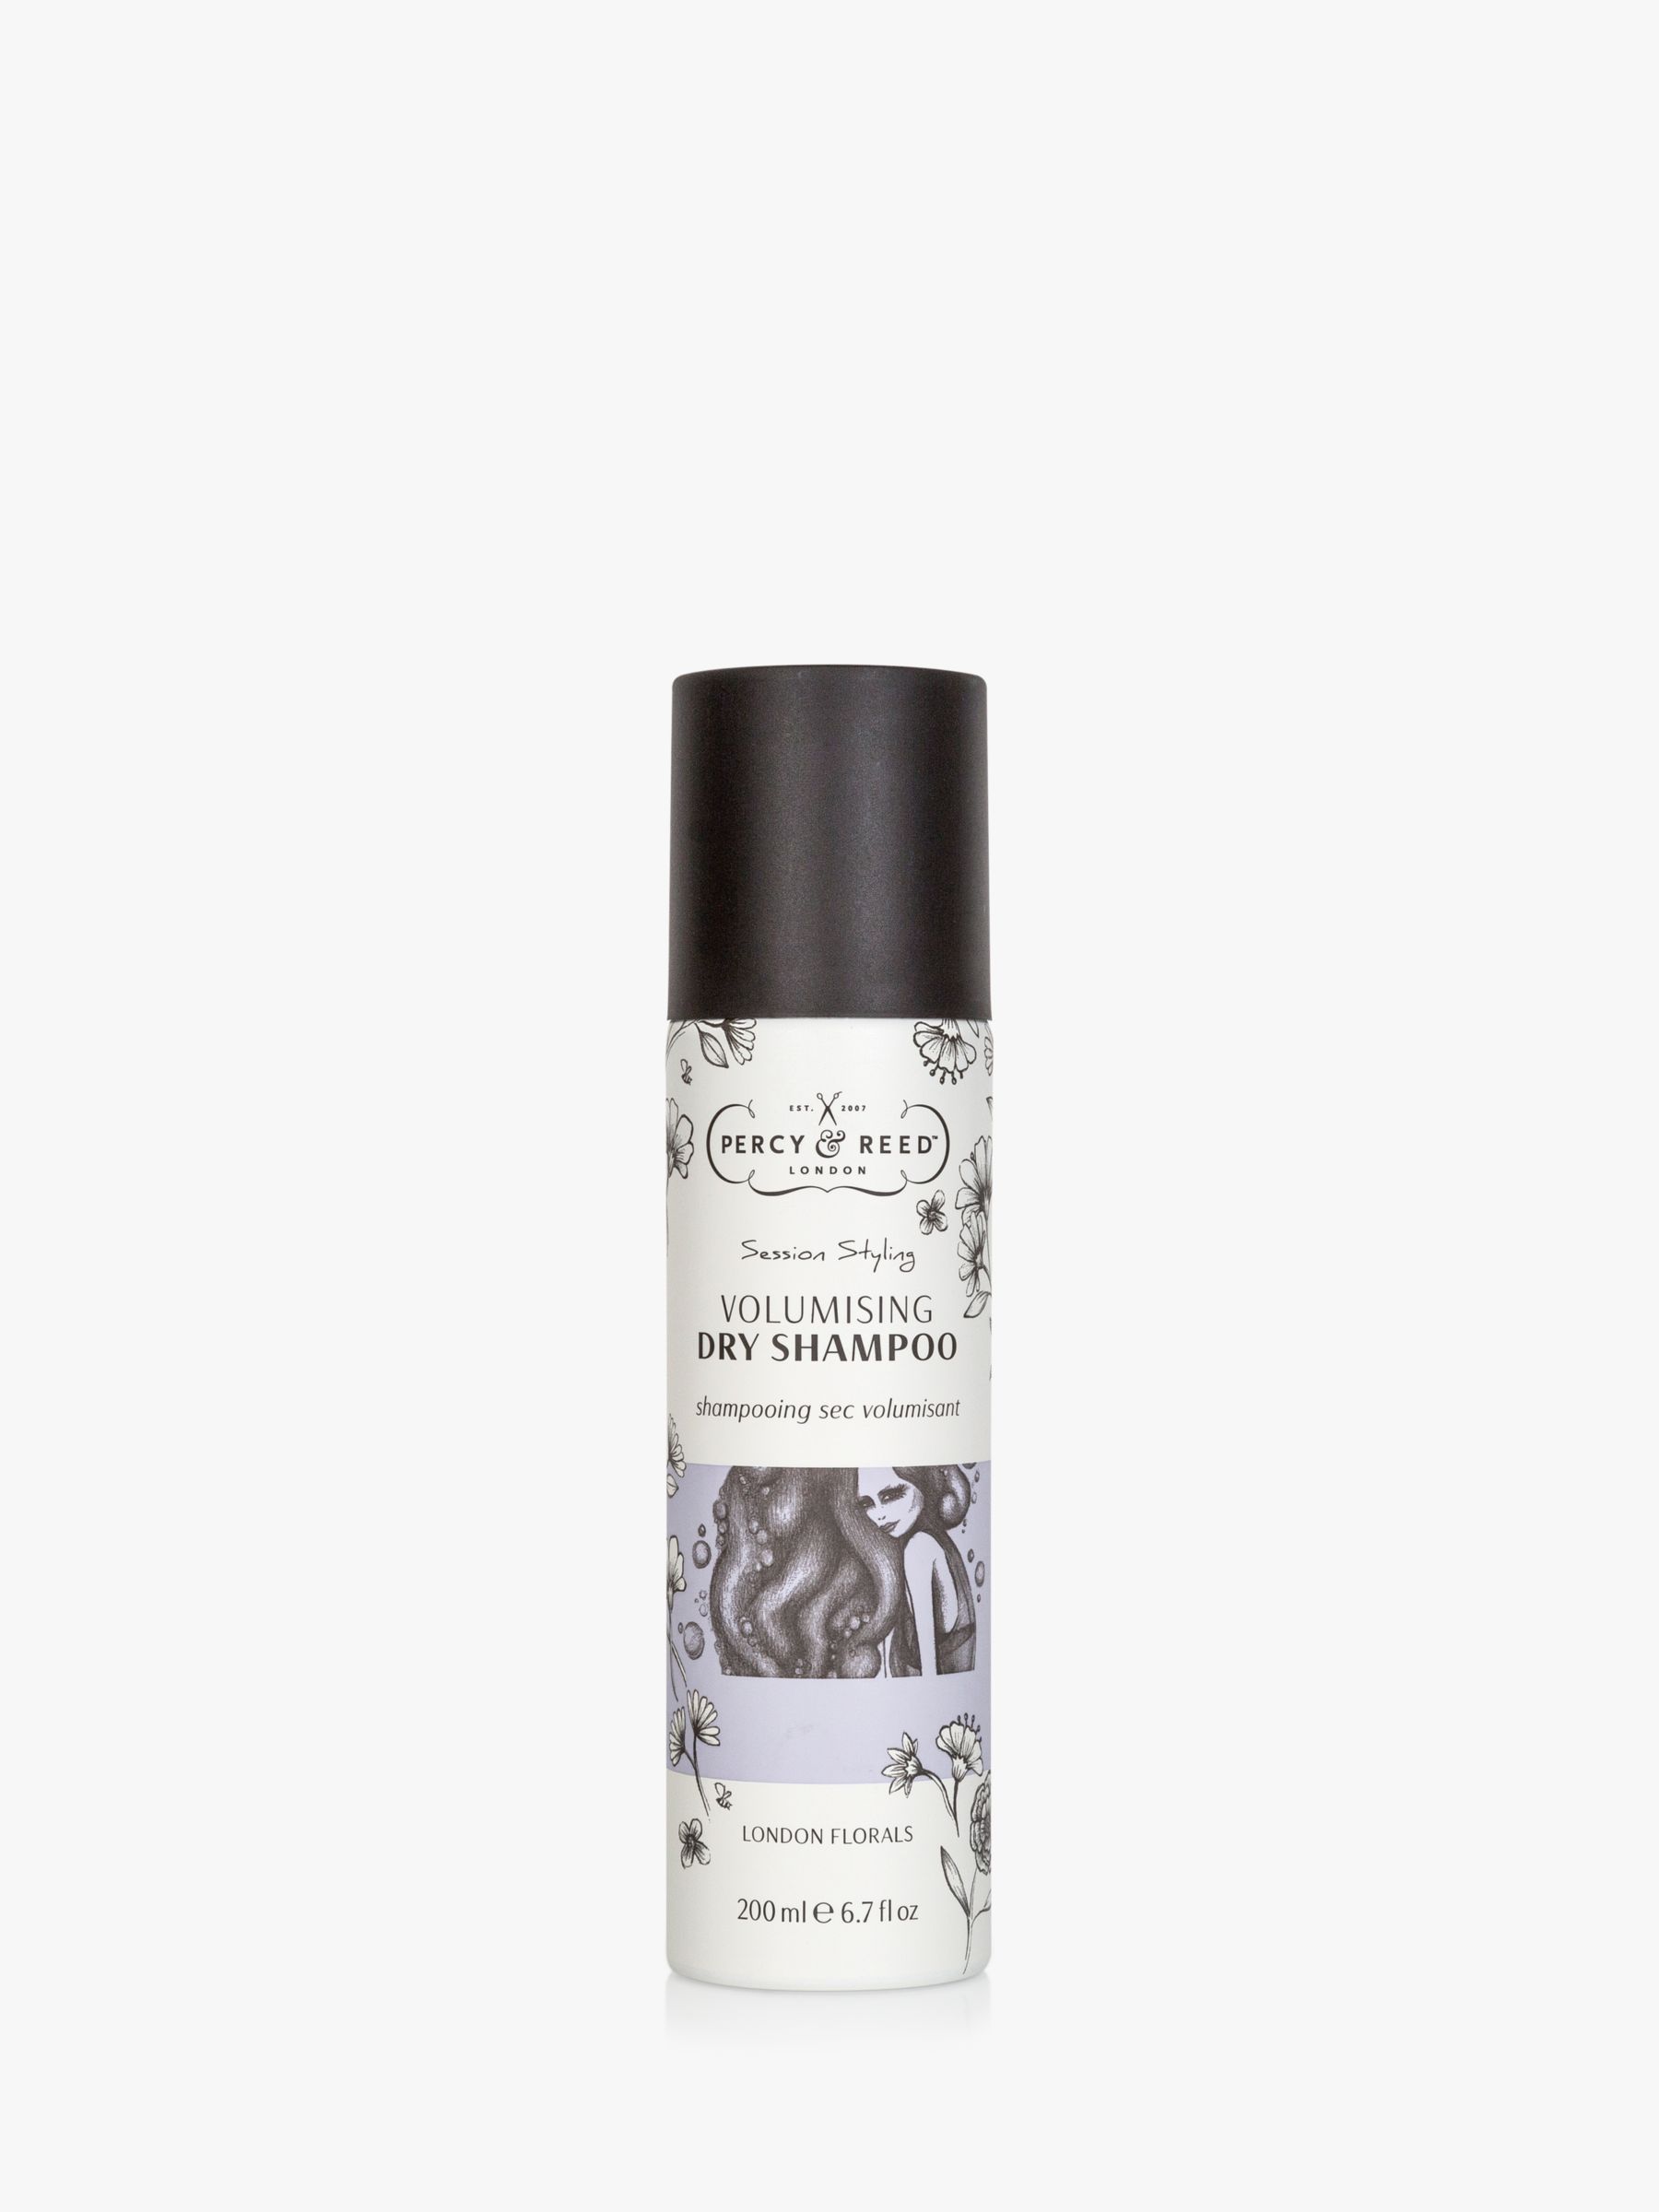 Percy & Reed Session Styling Volumising Dry Shampoo London Florals Edition, 200ml 1